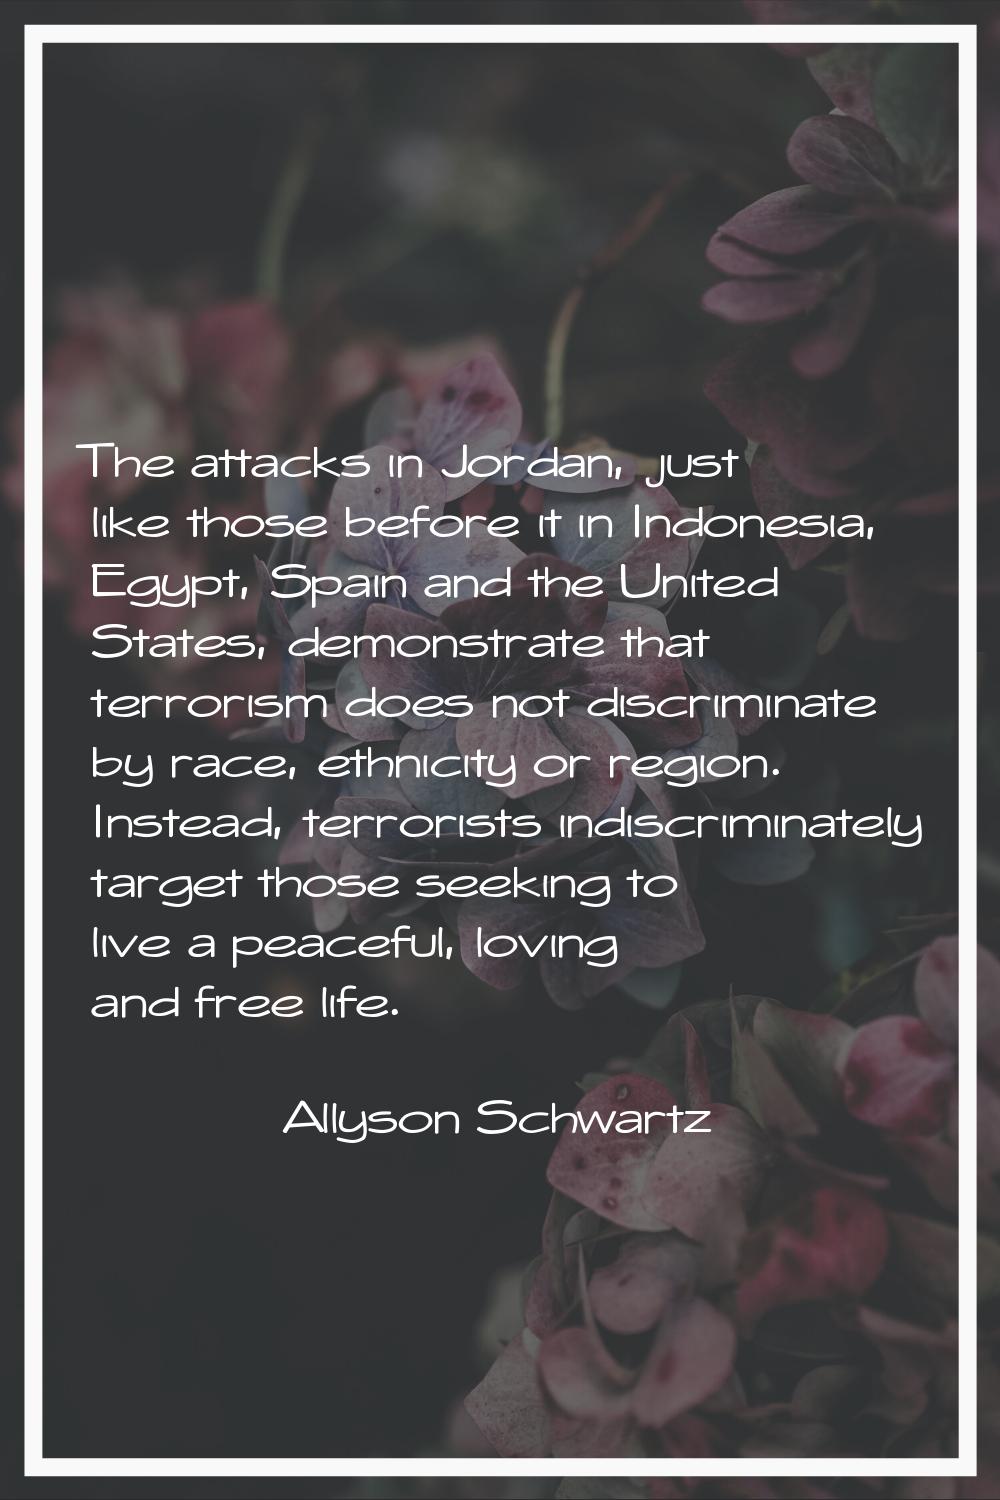 The attacks in Jordan, just like those before it in Indonesia, Egypt, Spain and the United States, 